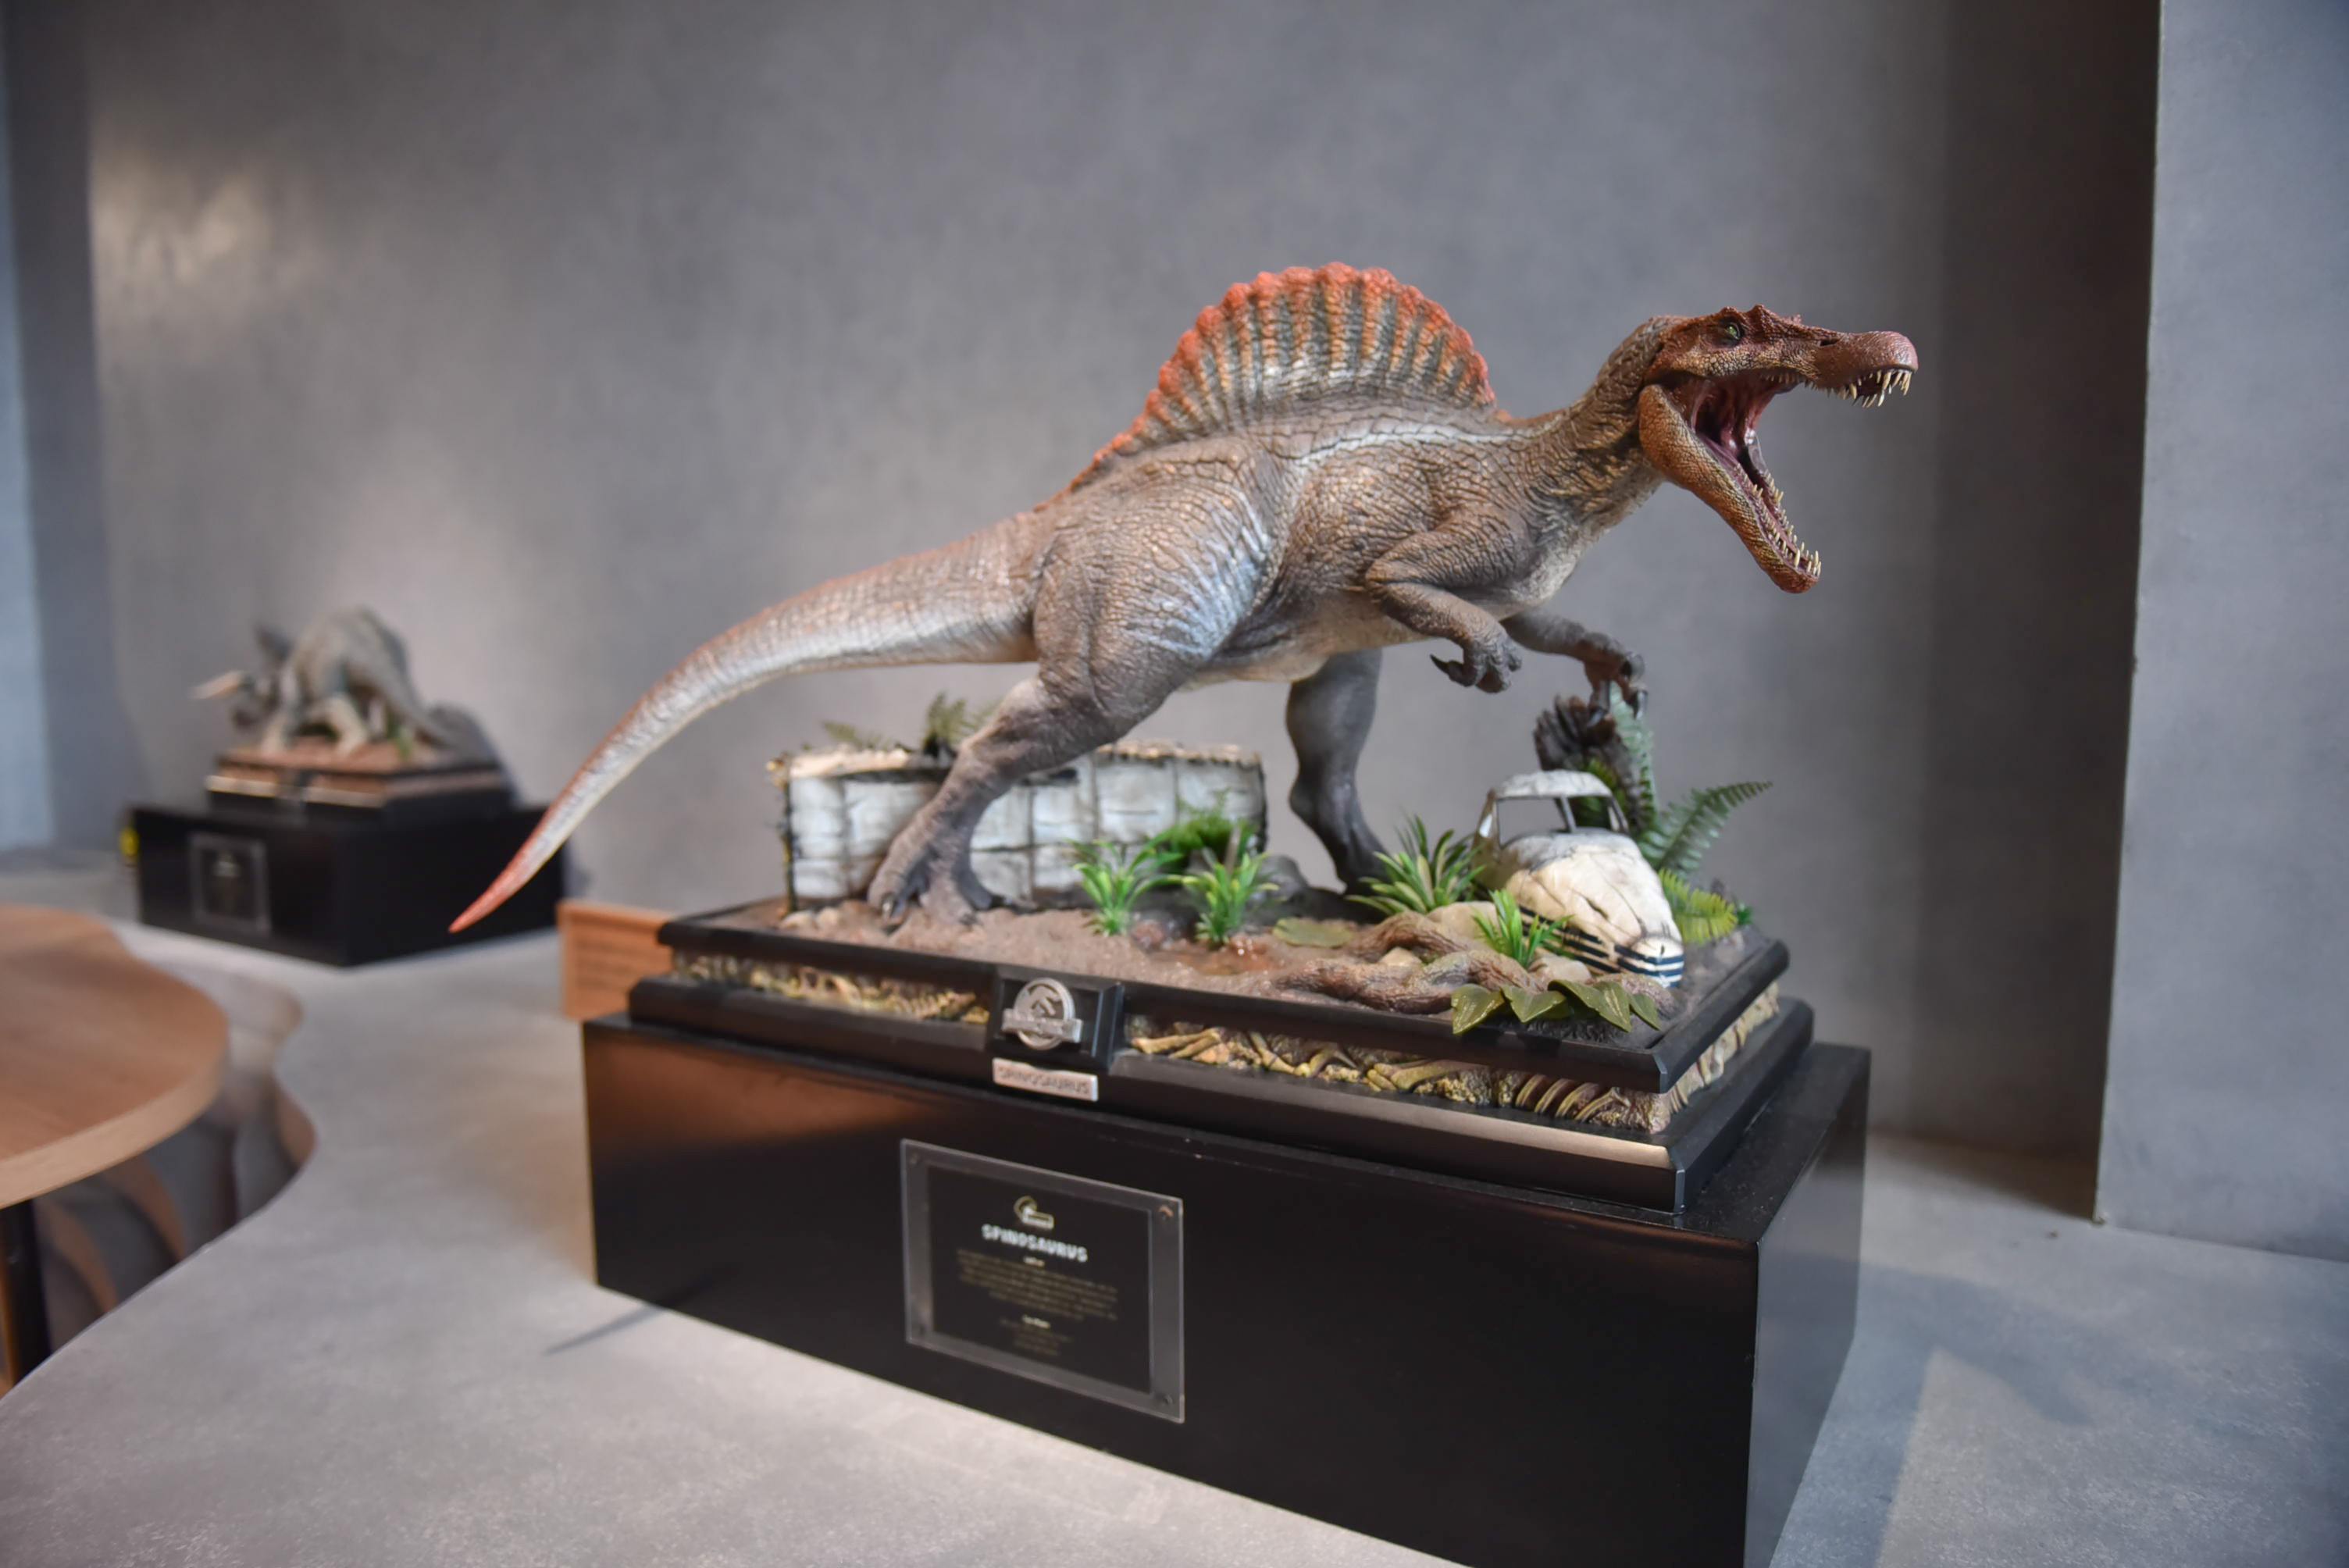 A dinosaur model on display at SAURUS Coffee & Gallery in Go Vap District, Ho Chi Minh City. Photo: Ngoc Phuong / Tuoi Tre News